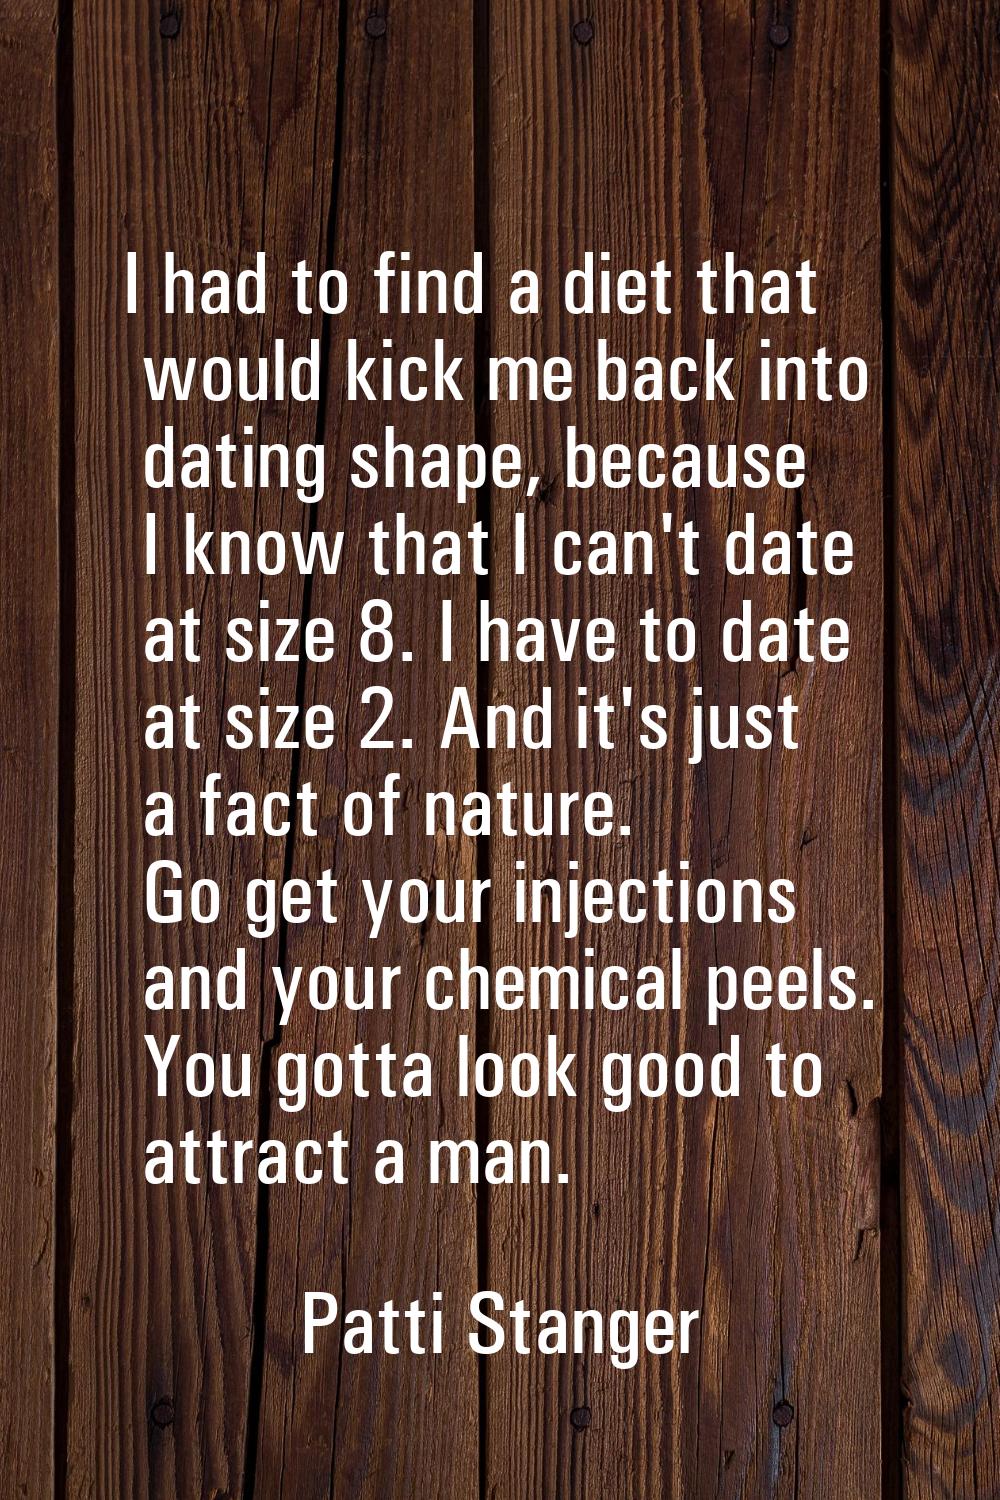 I had to find a diet that would kick me back into dating shape, because I know that I can't date at